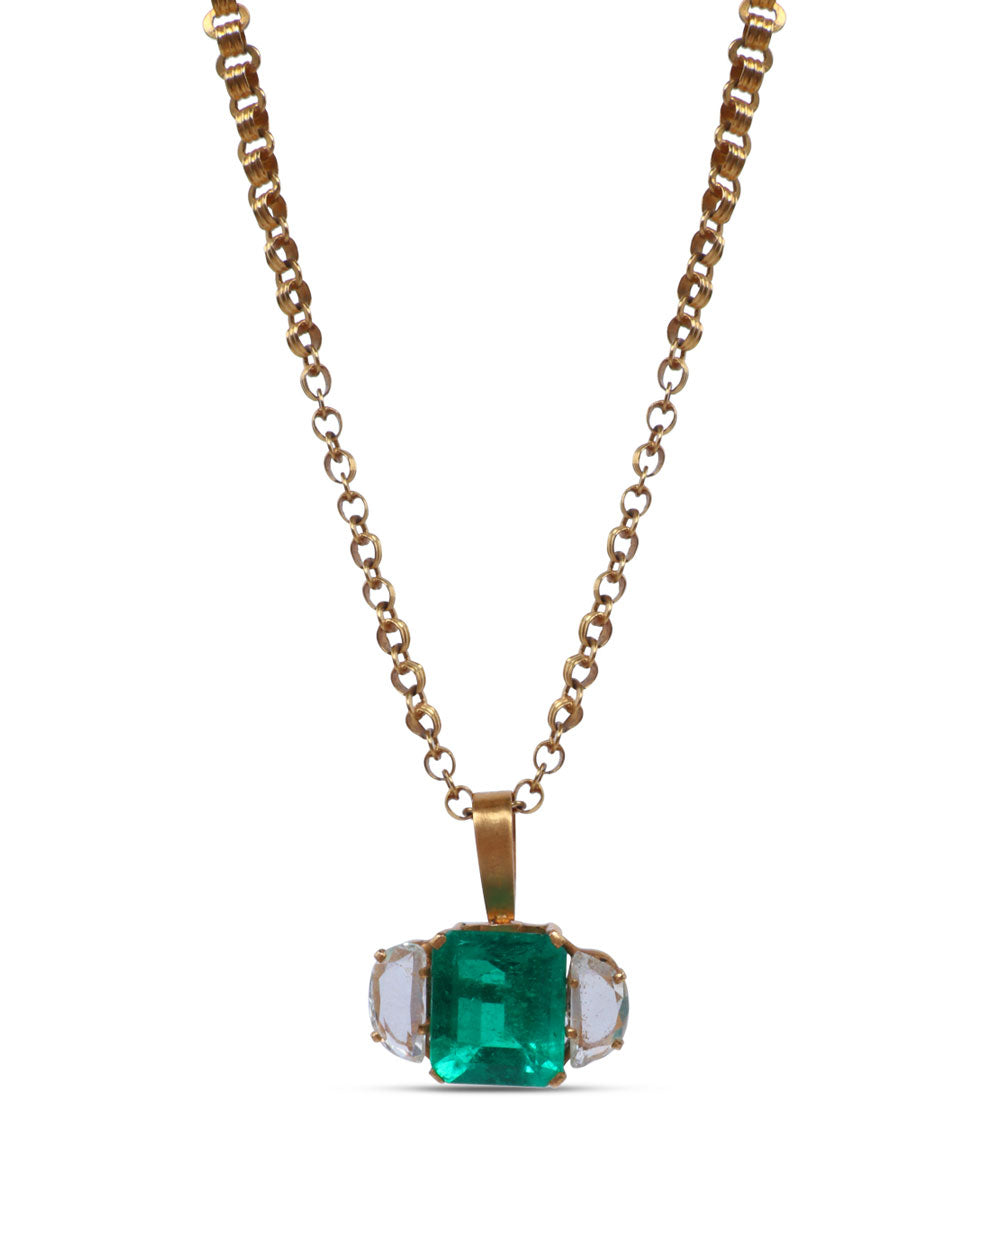 Emerald and Diamond Vintage Necklace